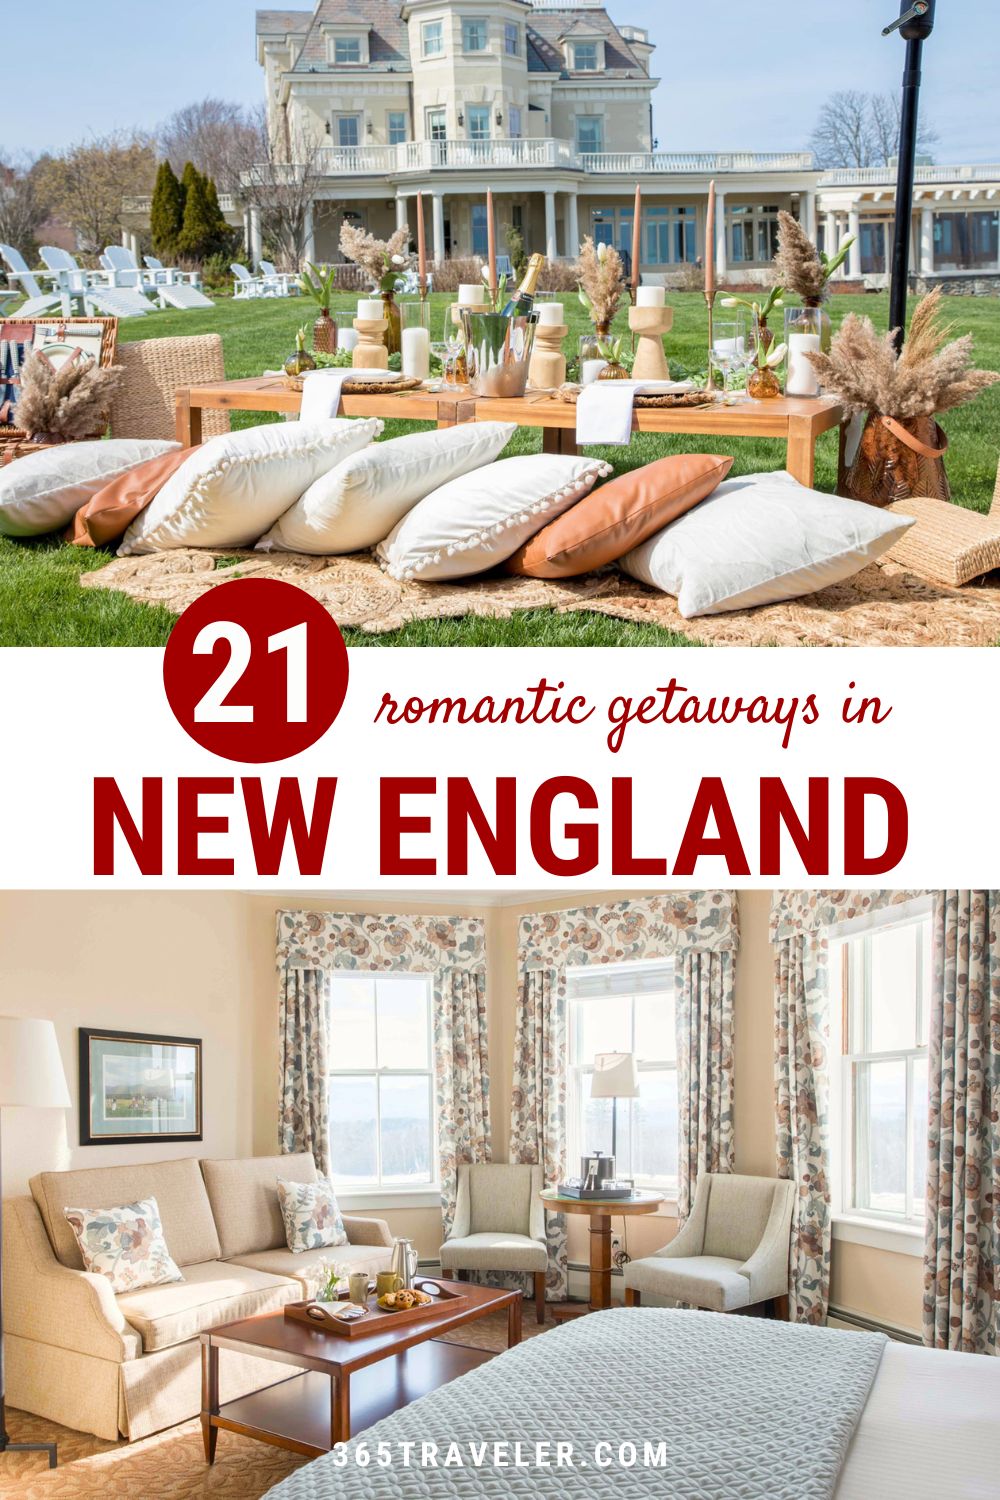 21 Romantic Getaways in New England You’ll Adore